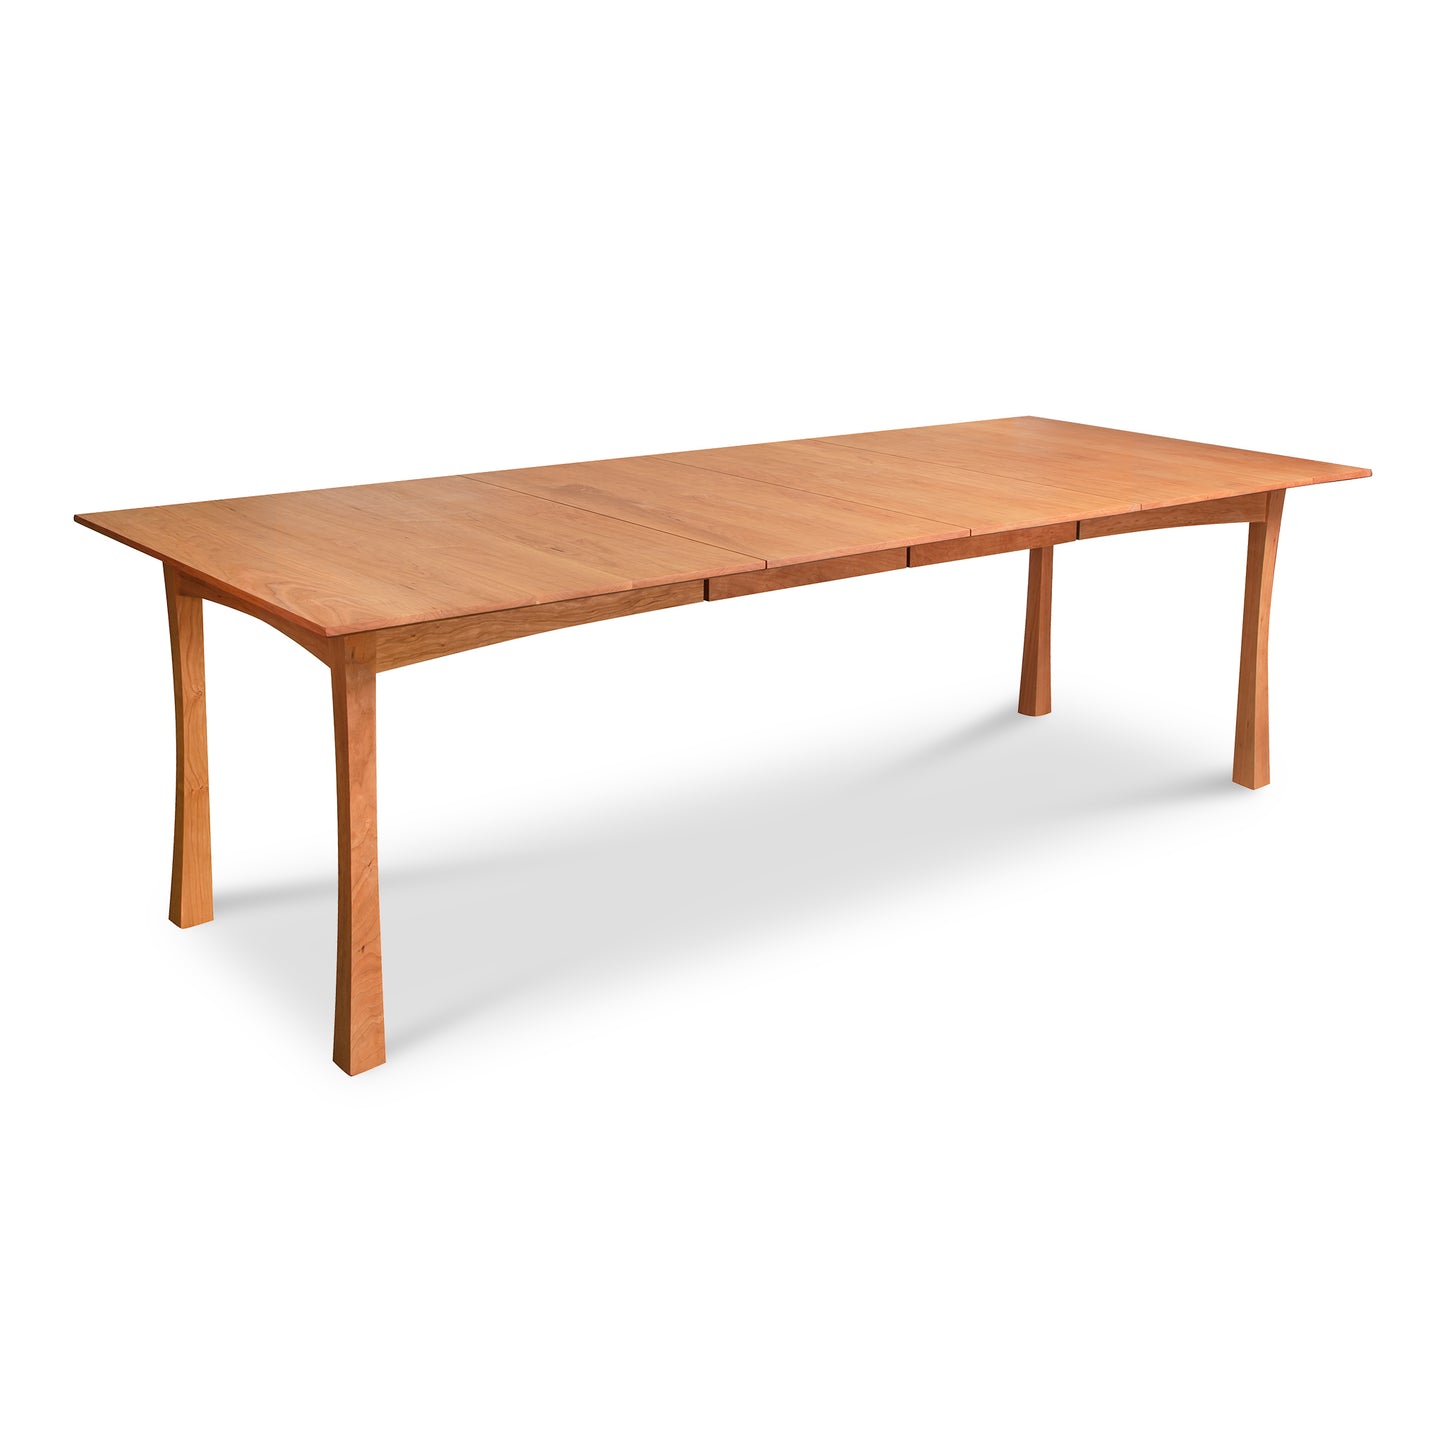 A Vermont Furniture Designs Contemporary Craftsman Extension Dining Table, crafted by Vermont woodworkers, featuring a wooden rectangular shape with an extended leaf on a white background.